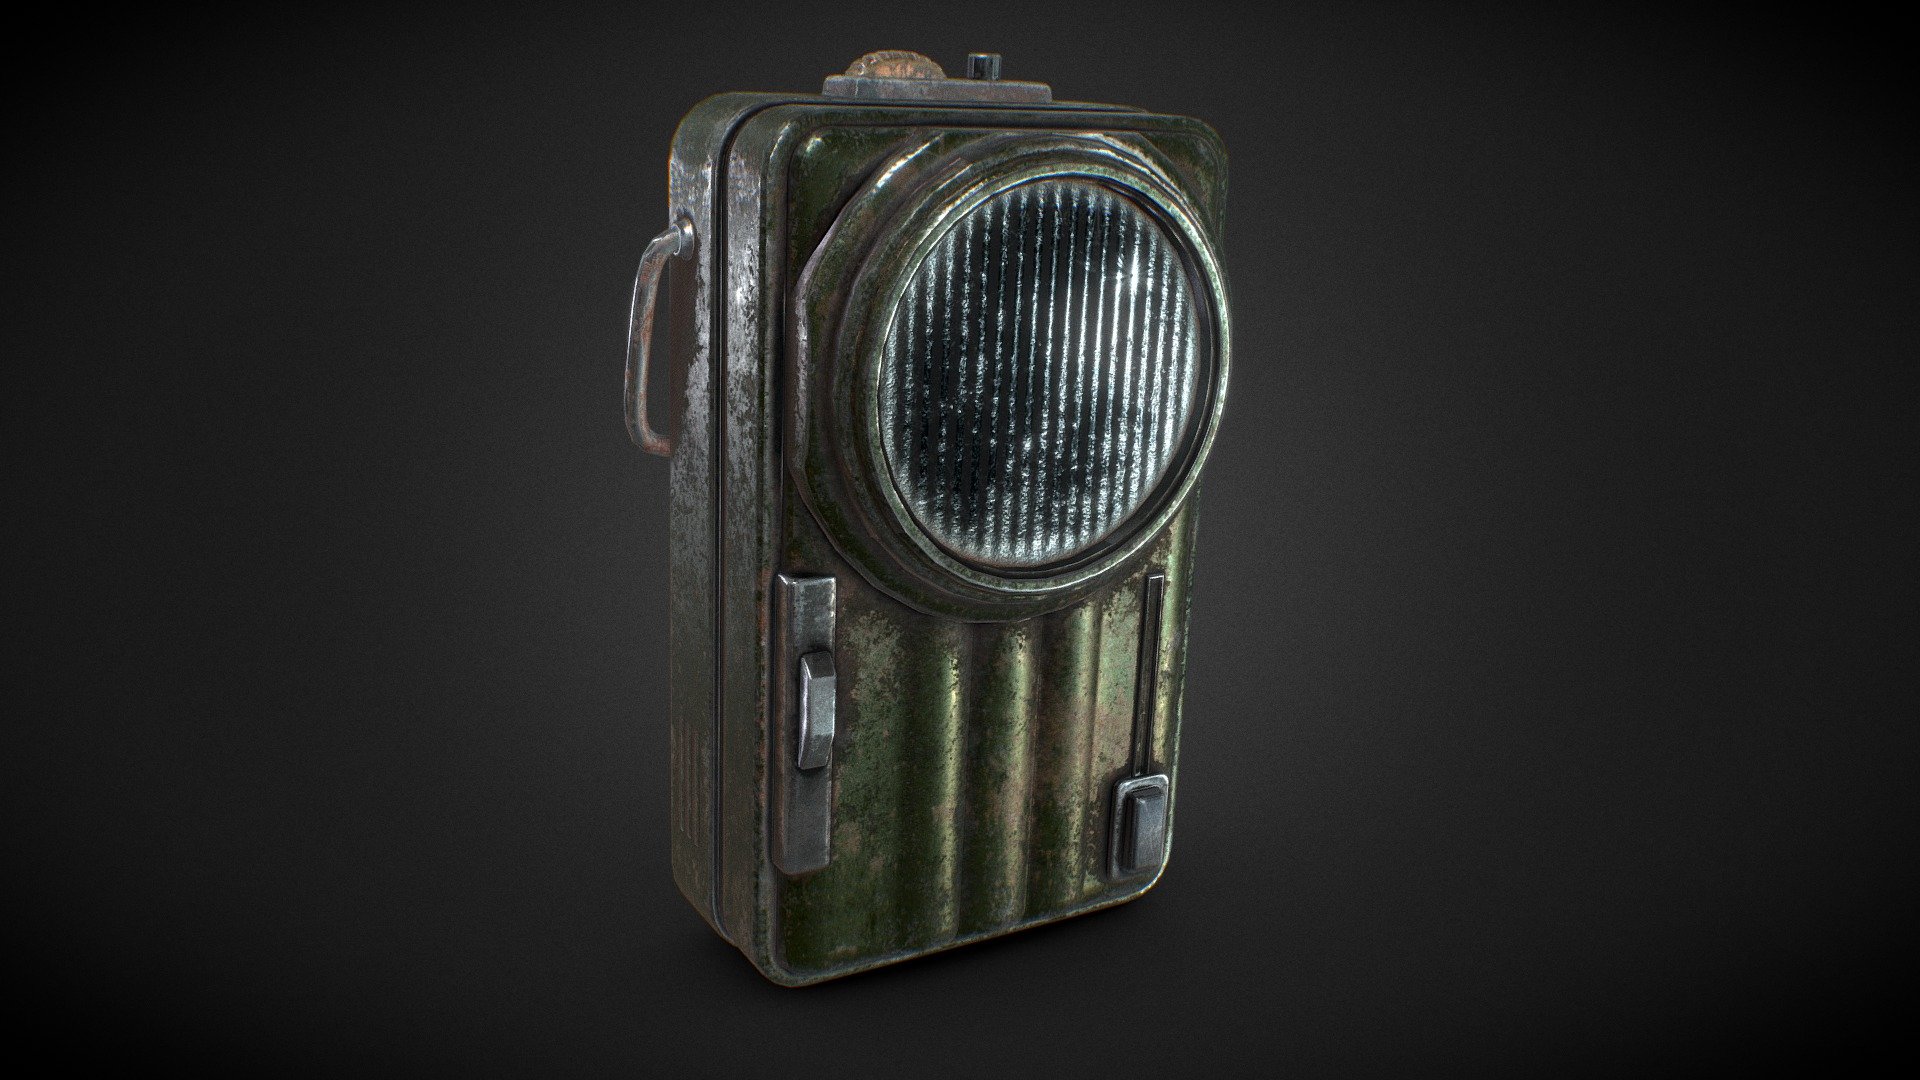 A Military Pocket Lantern I made in blender, using the High poly / Low Poly workflow. I later textured it in Substance painter :)

The model was based off from an image that dates back to USSR times 3d model